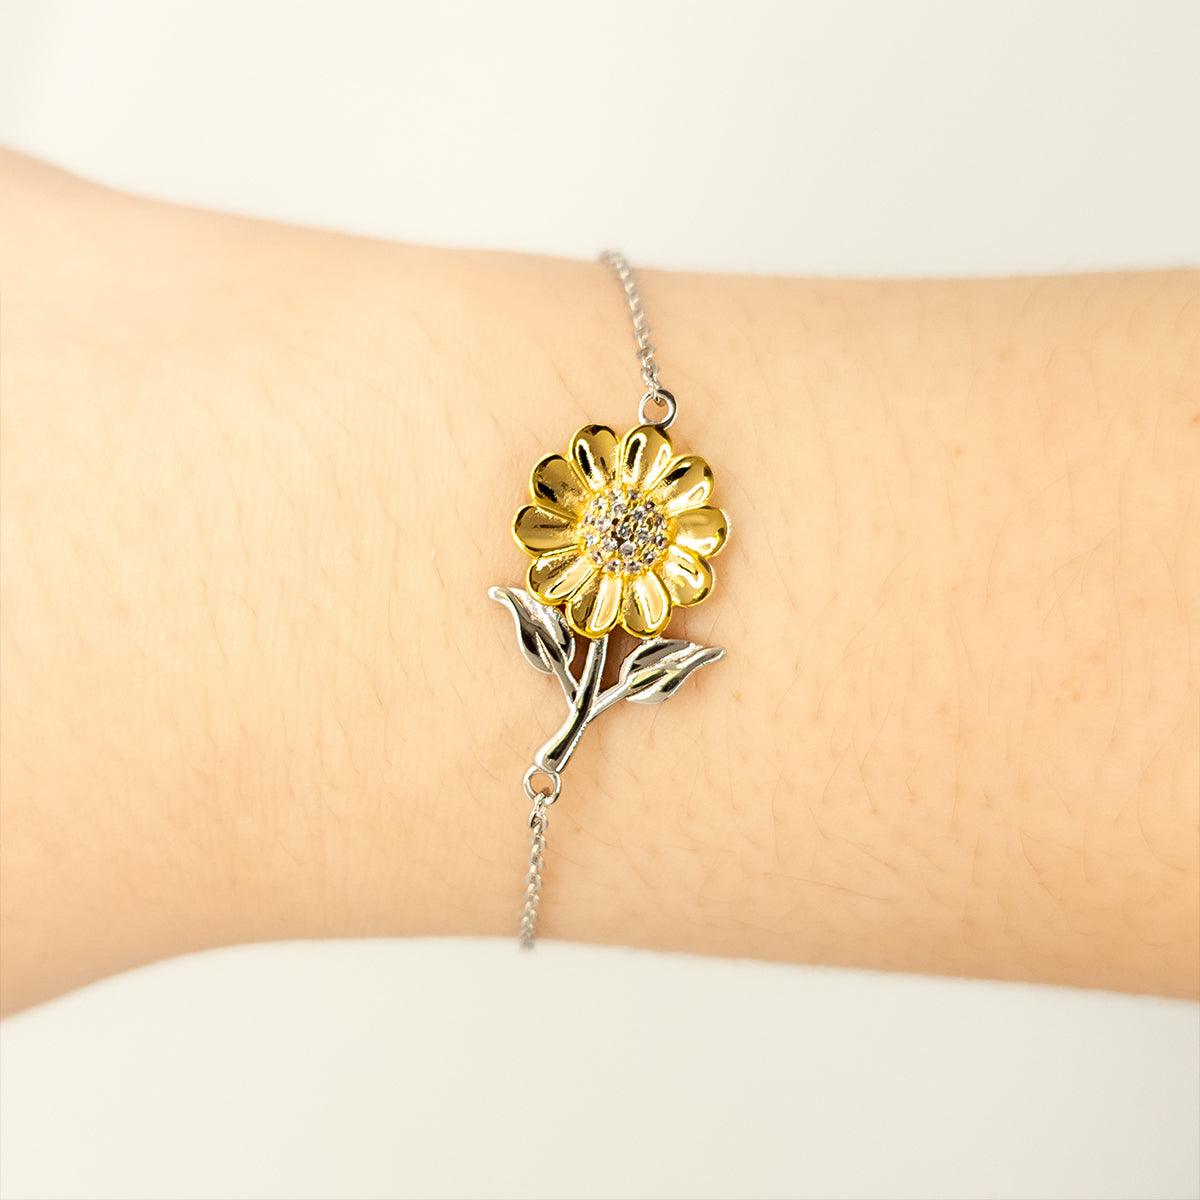 Sarcastic Administrative Assistant Sunflower Bracelet Gifts, Christmas Holiday Gifts for Administrative Assistant Birthday Message Card, Administrative Assistant: Because greatness is woven into the fabric of every day, Coworkers, Friends - Mallard Moon Gift Shop